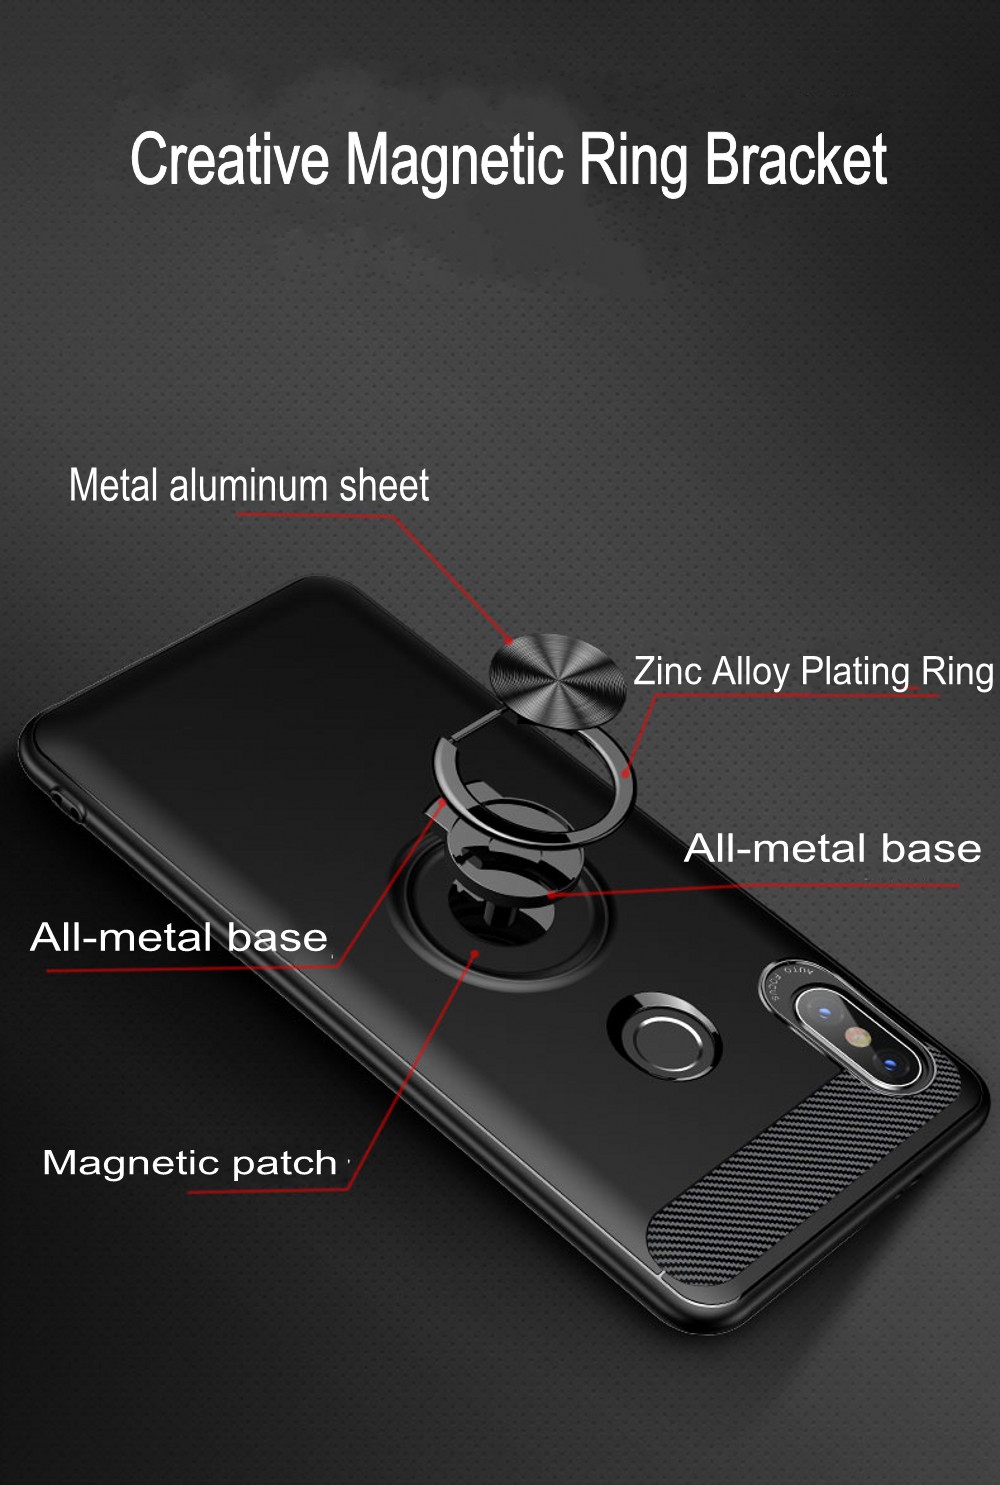 Bakeey-360deg-Adjustable-Metal-Ring-Kickstand-Magnetic-PC-Protective-Case-for-Xiaomi-Redmi-Note-5-No-1305910-3